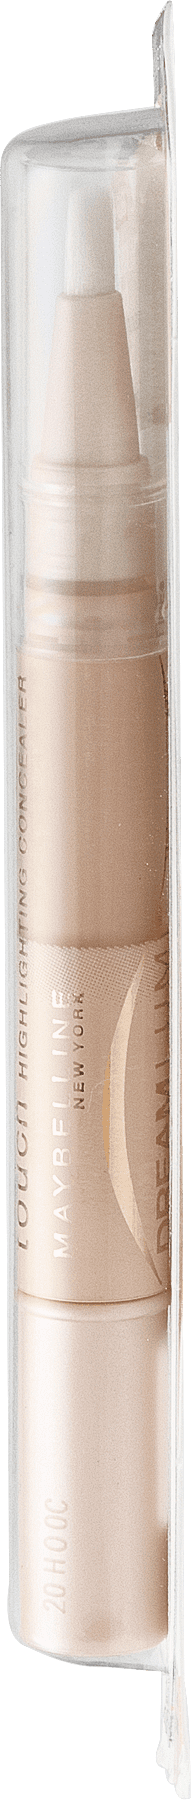 Maybelline New York Dream Lumi Touch Highlighting Concealer, Buff 